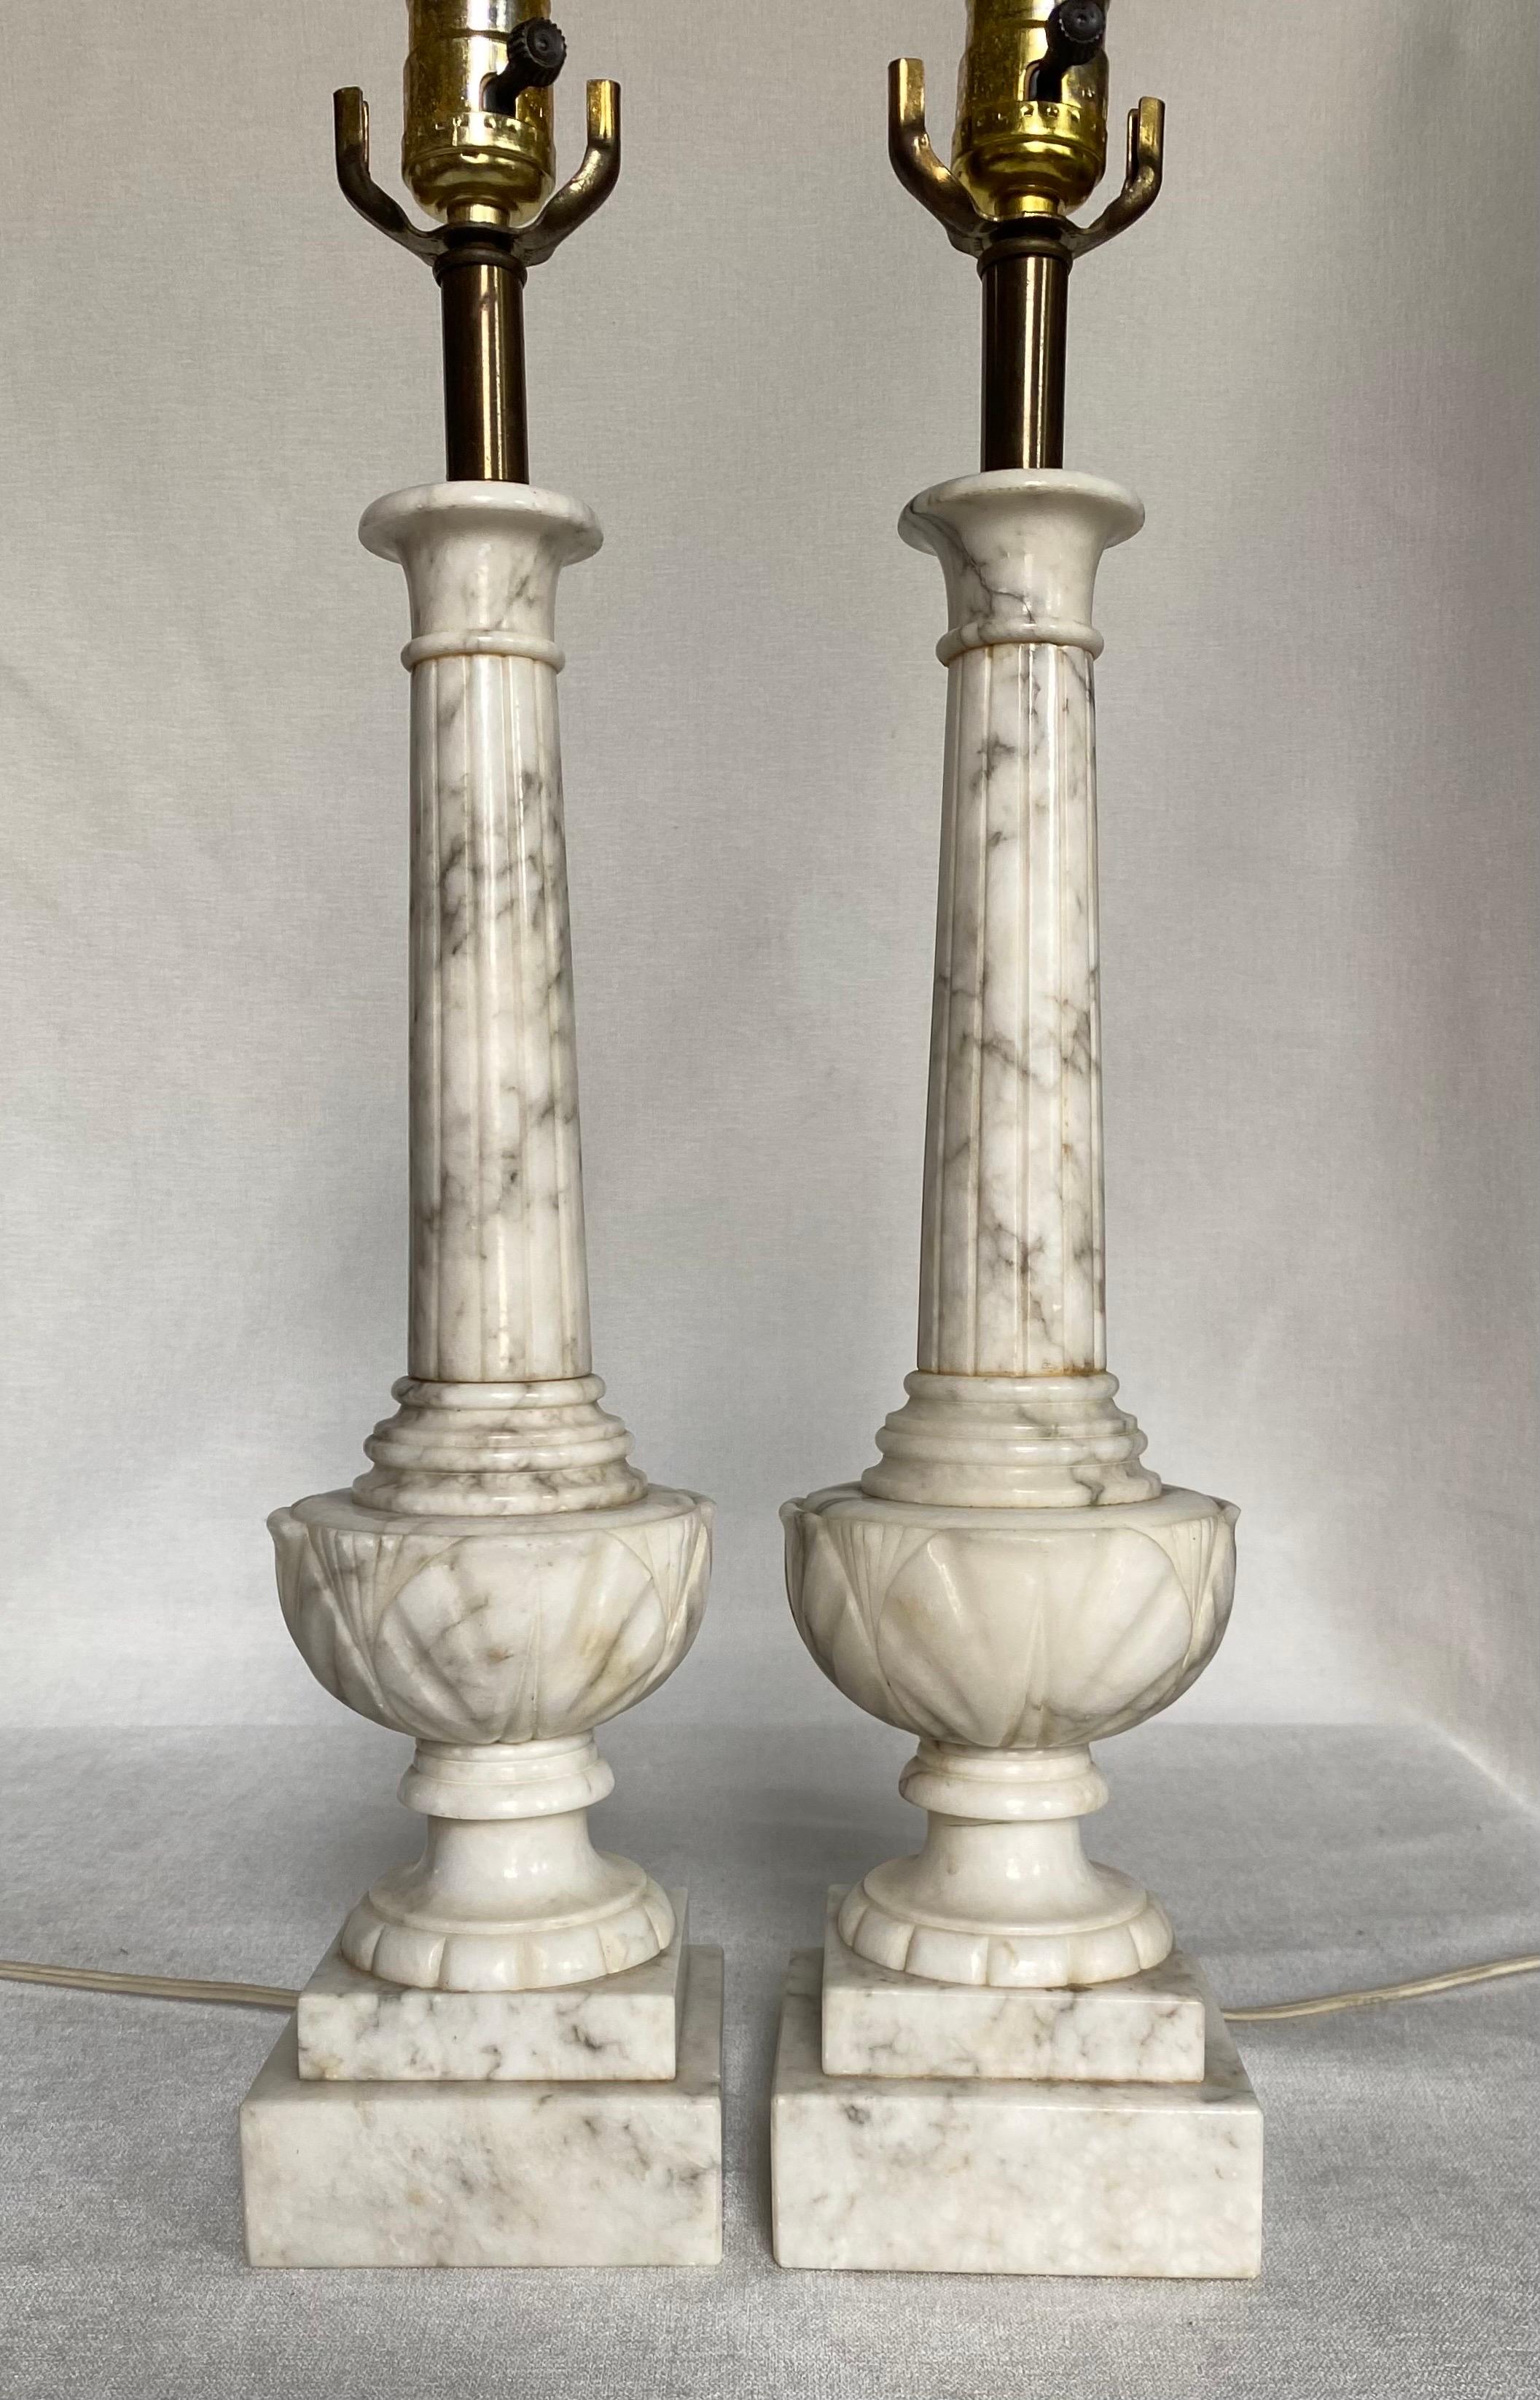 Neoclassical Italian Carved Fluted Column Marble Urn Table Lamps, Pair